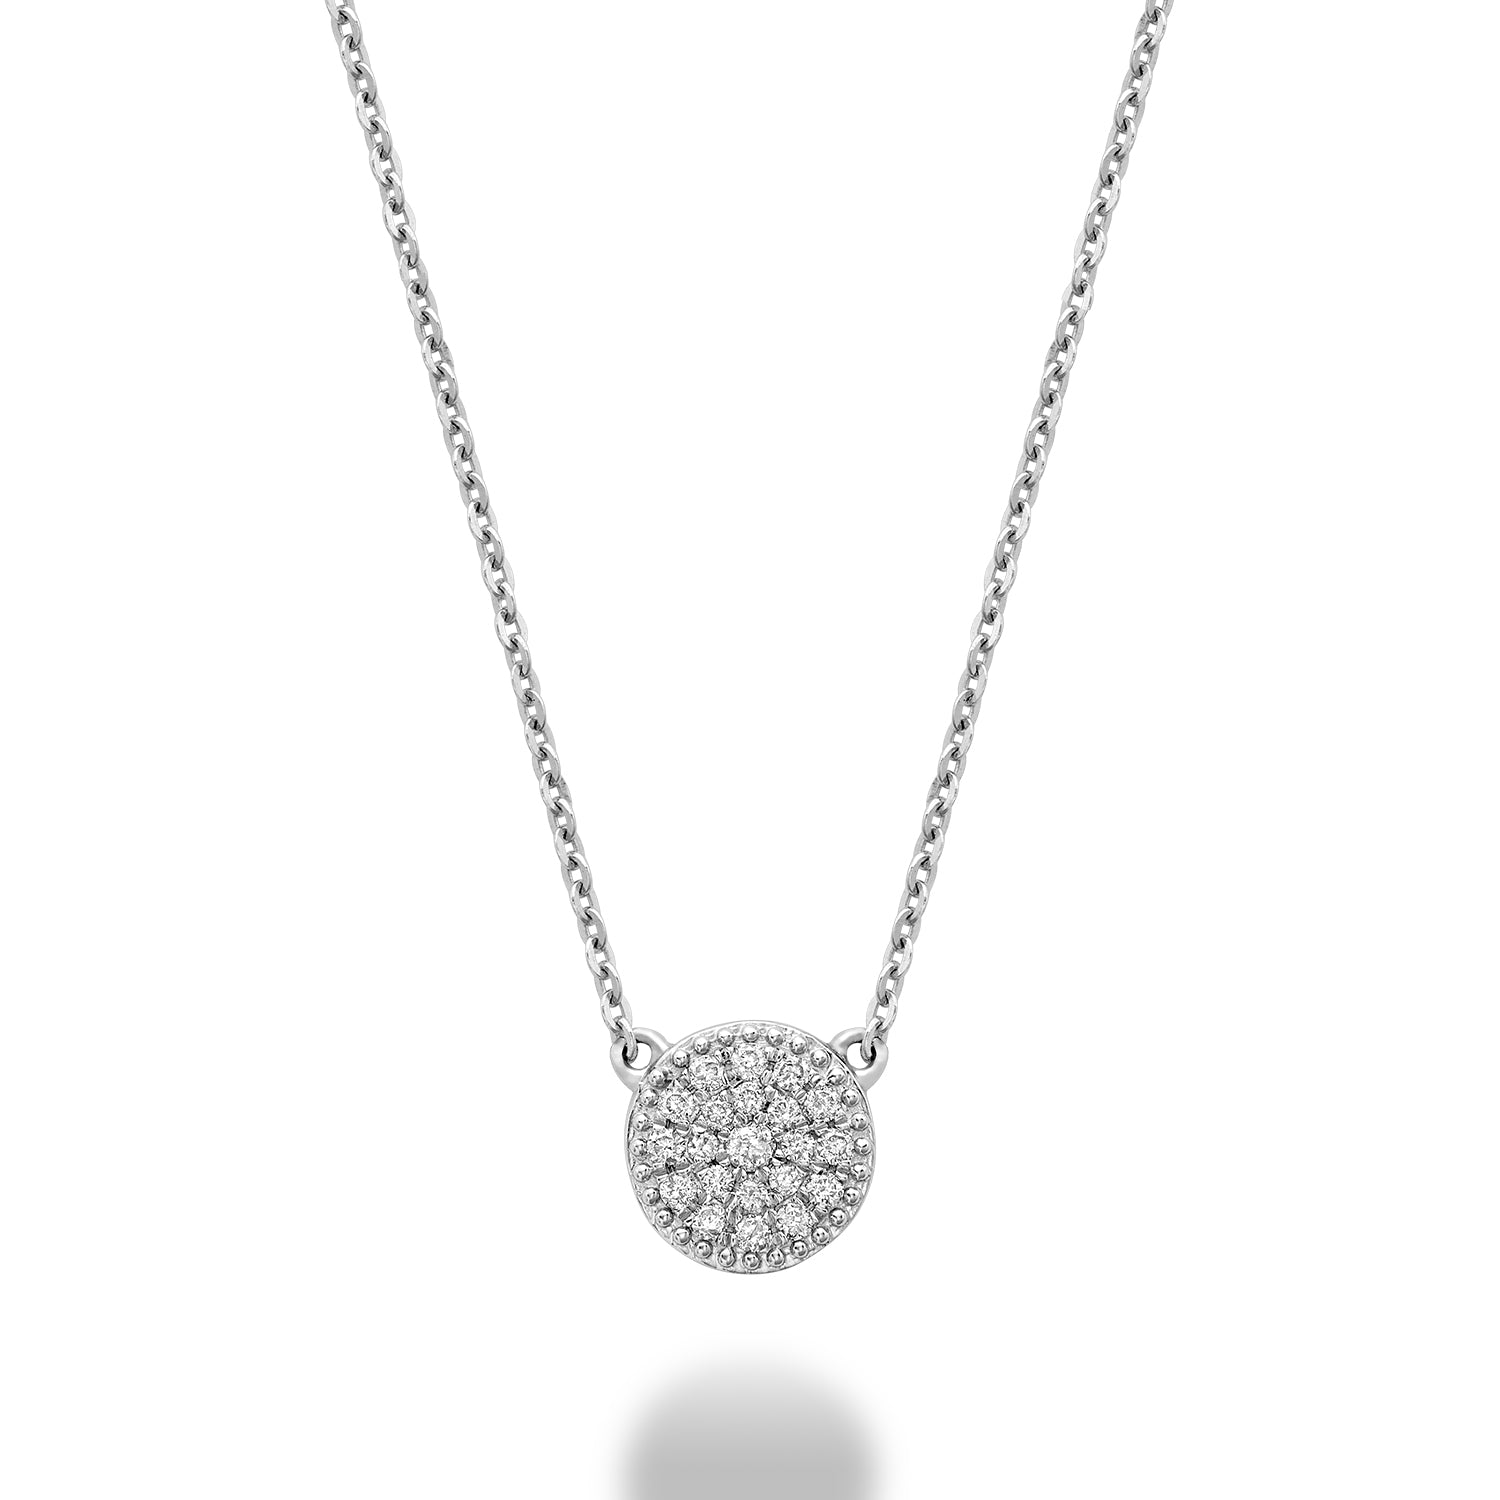 A close-up of a white gold diamond pave necklace. The necklace features a total of 0.10ct of diamonds set in a pave style. The diamonds are sparkling and eye-catching.